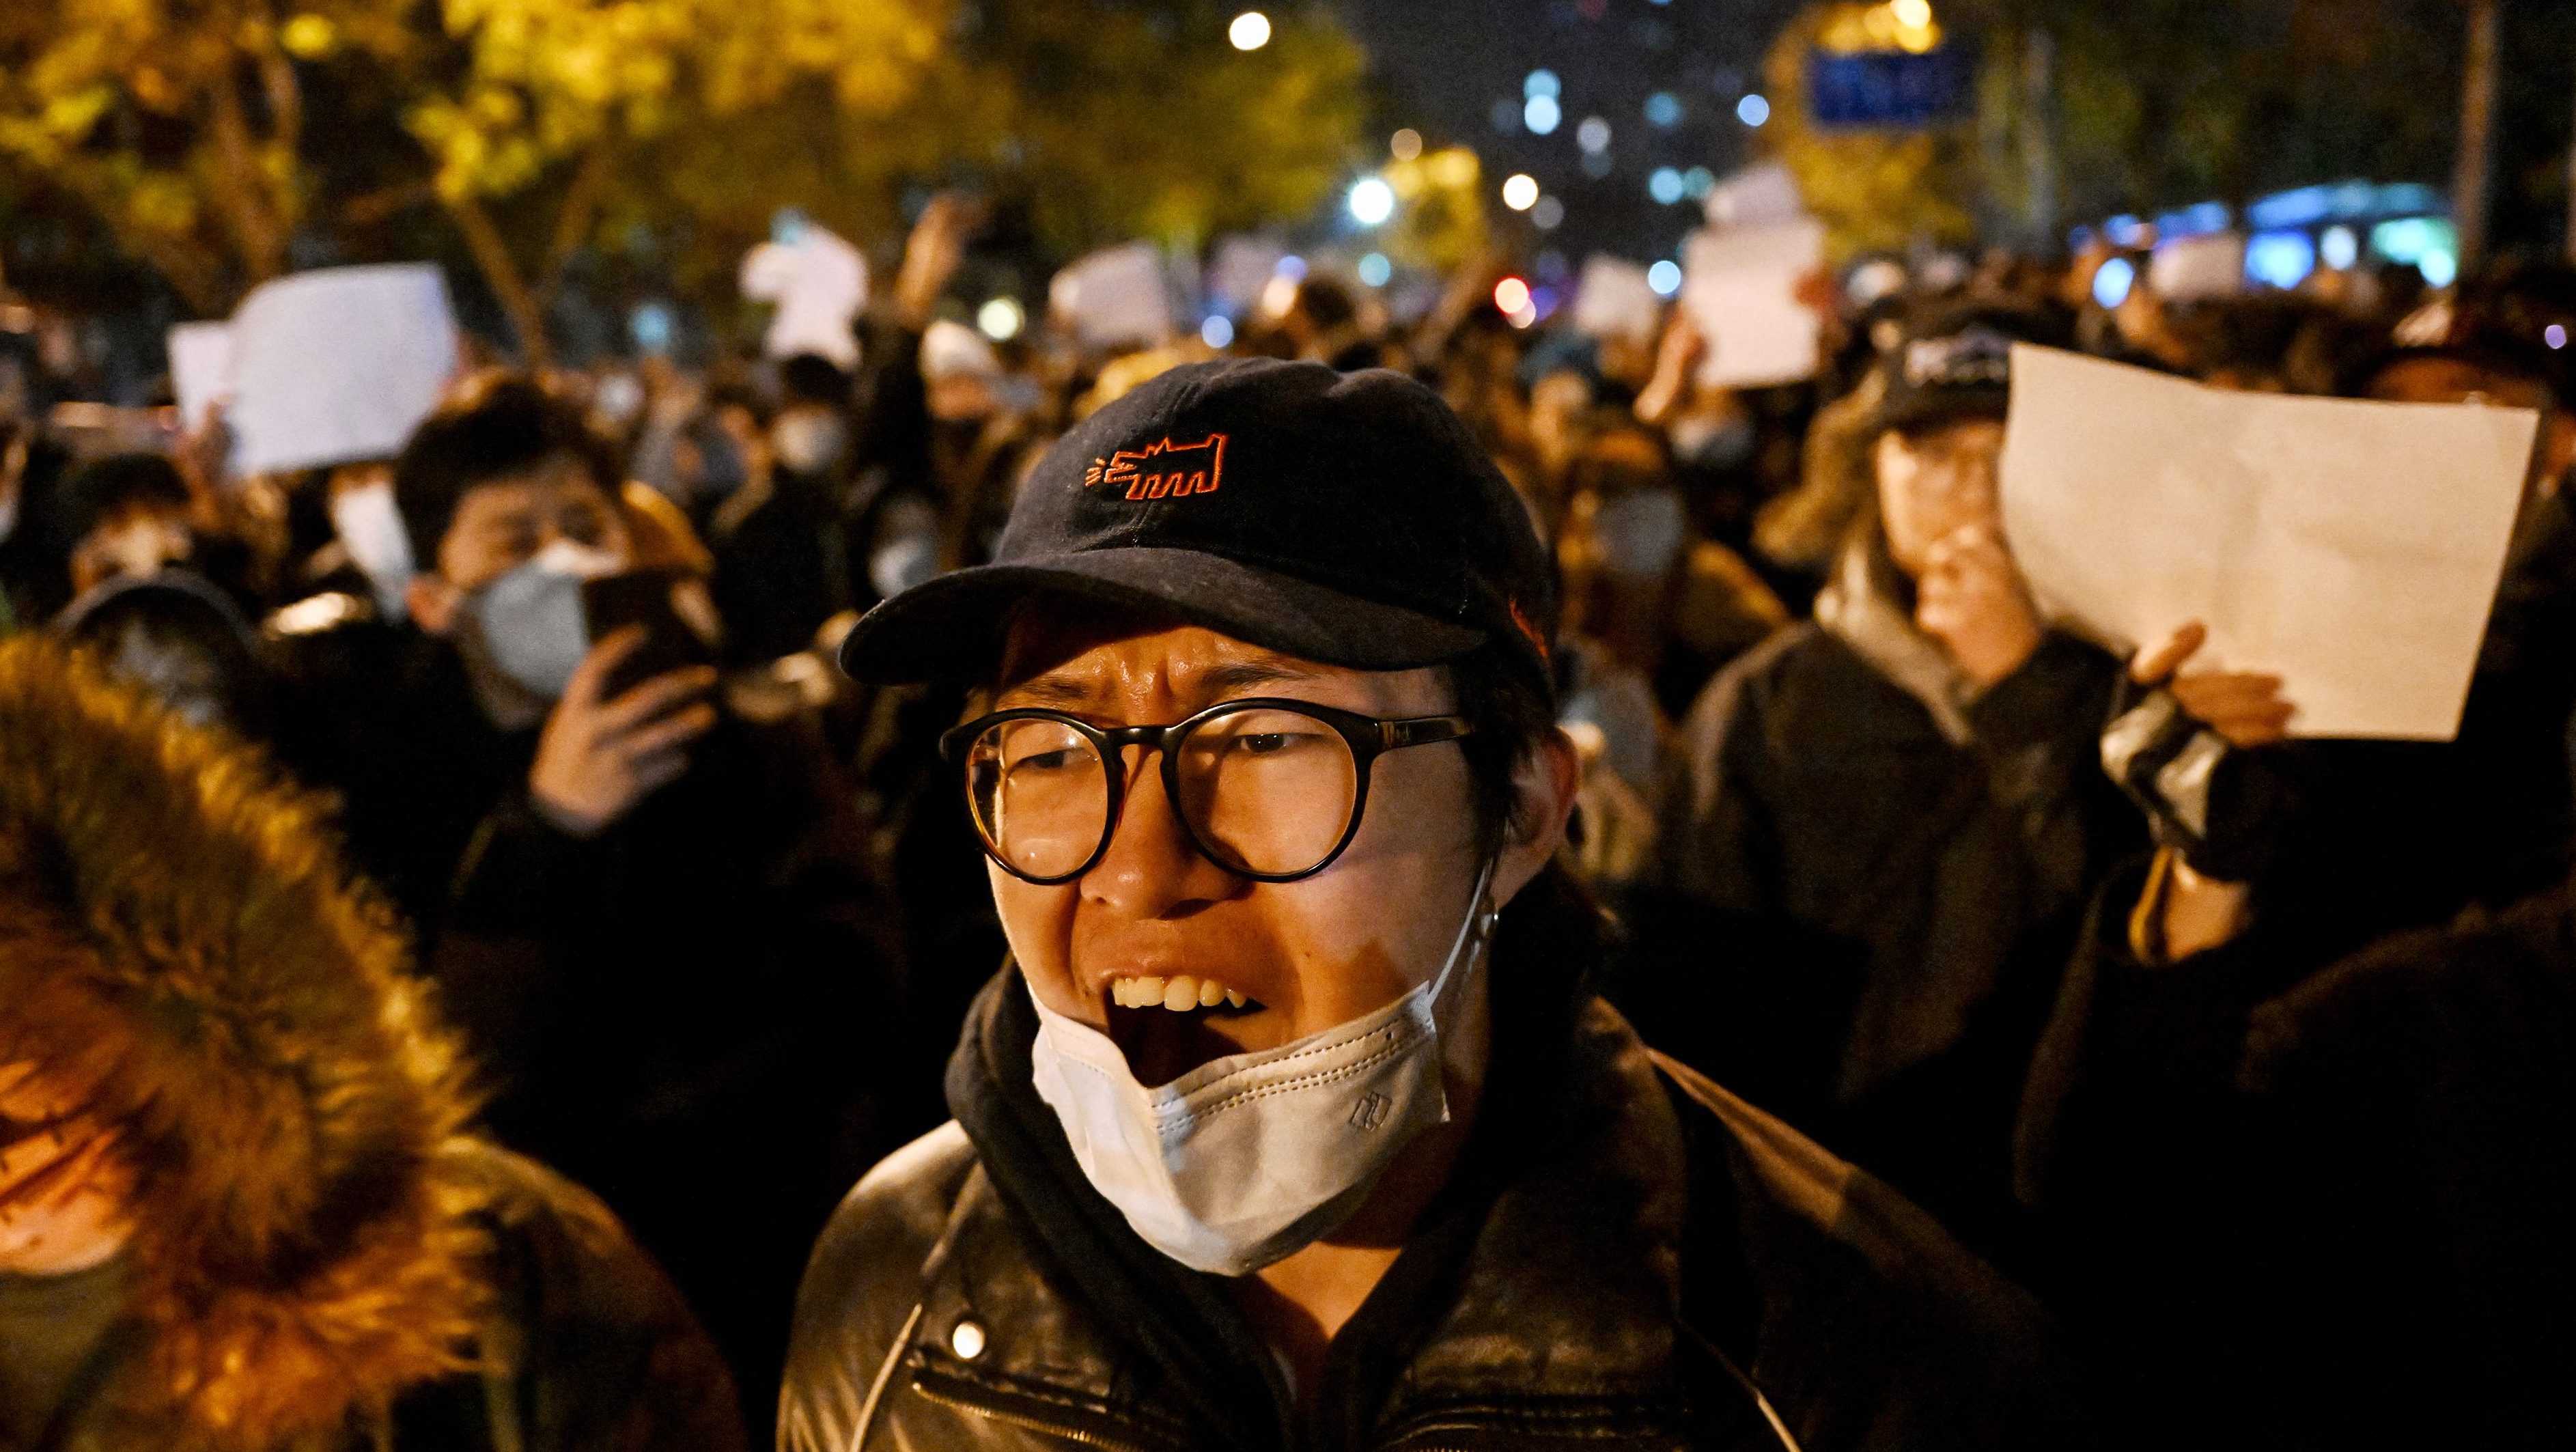 Protests in China Are Not Rare – But the Current Unrest Is
Significant